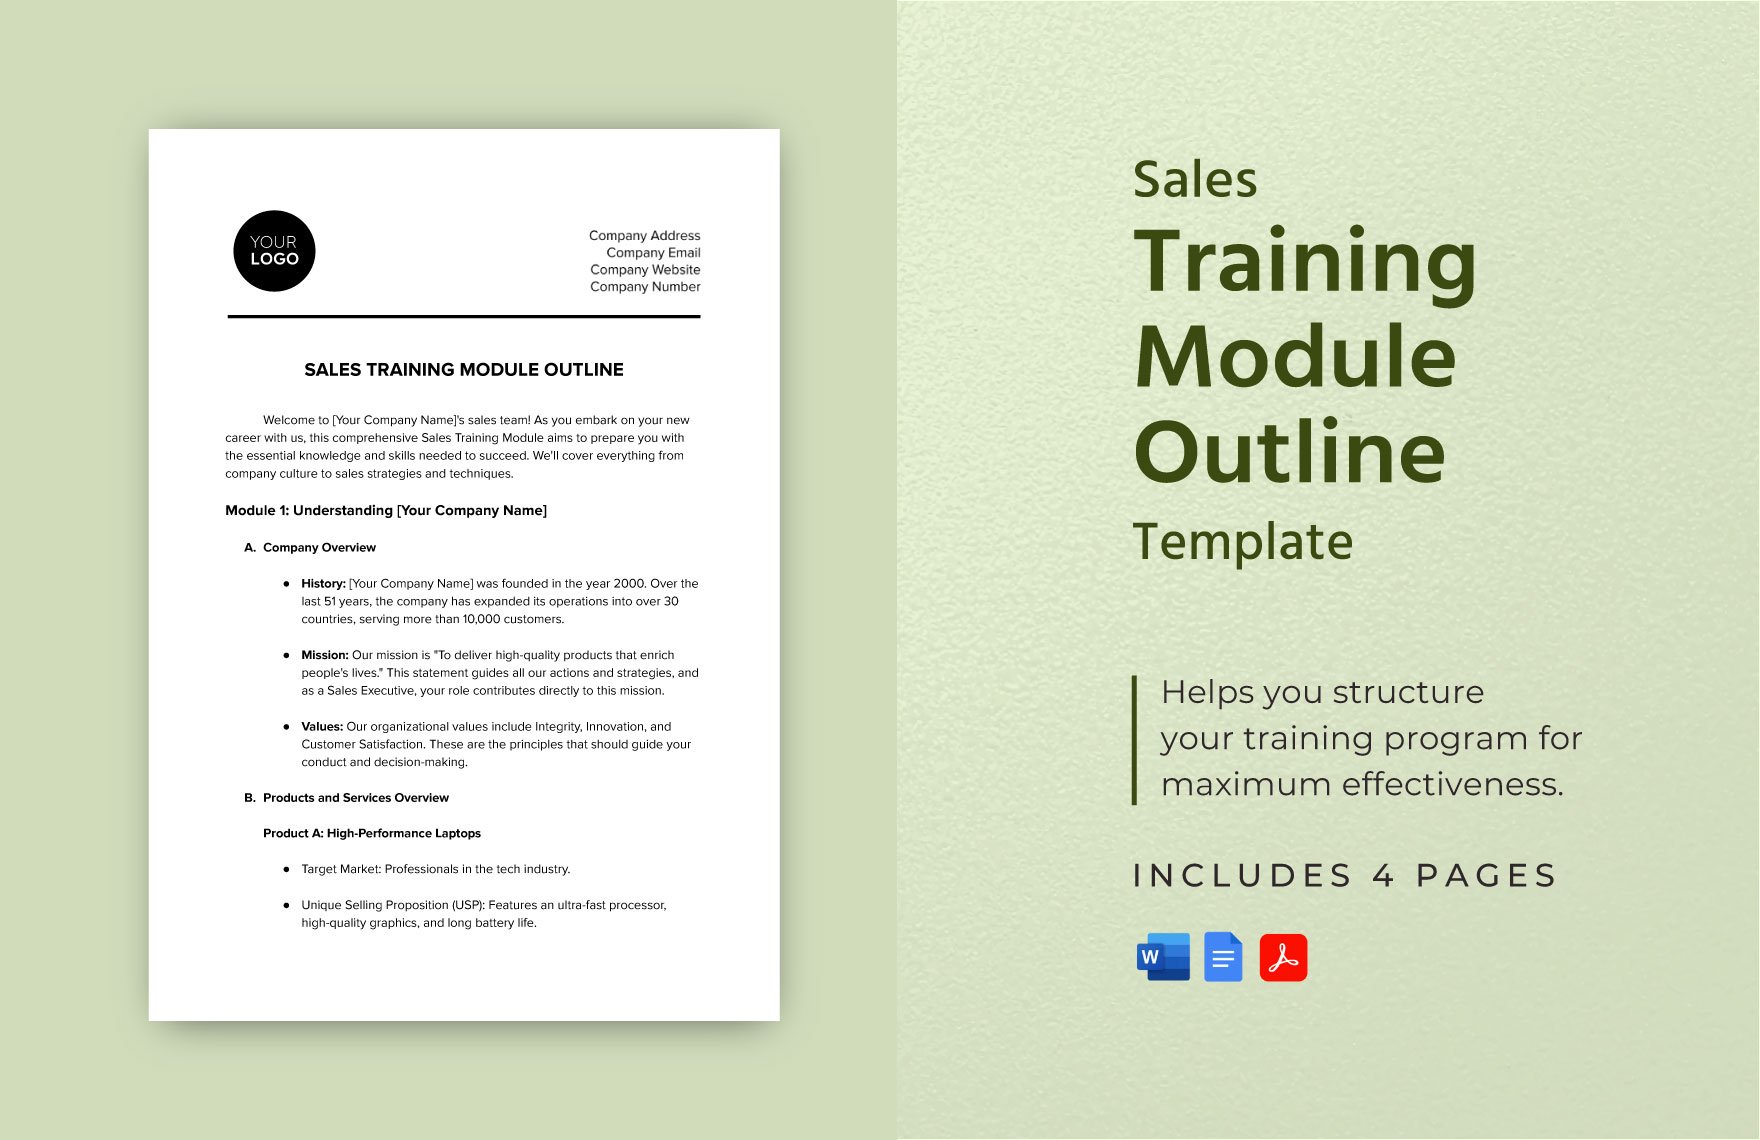 Sales Training Module Outline Template in Word, Google Docs, PDF